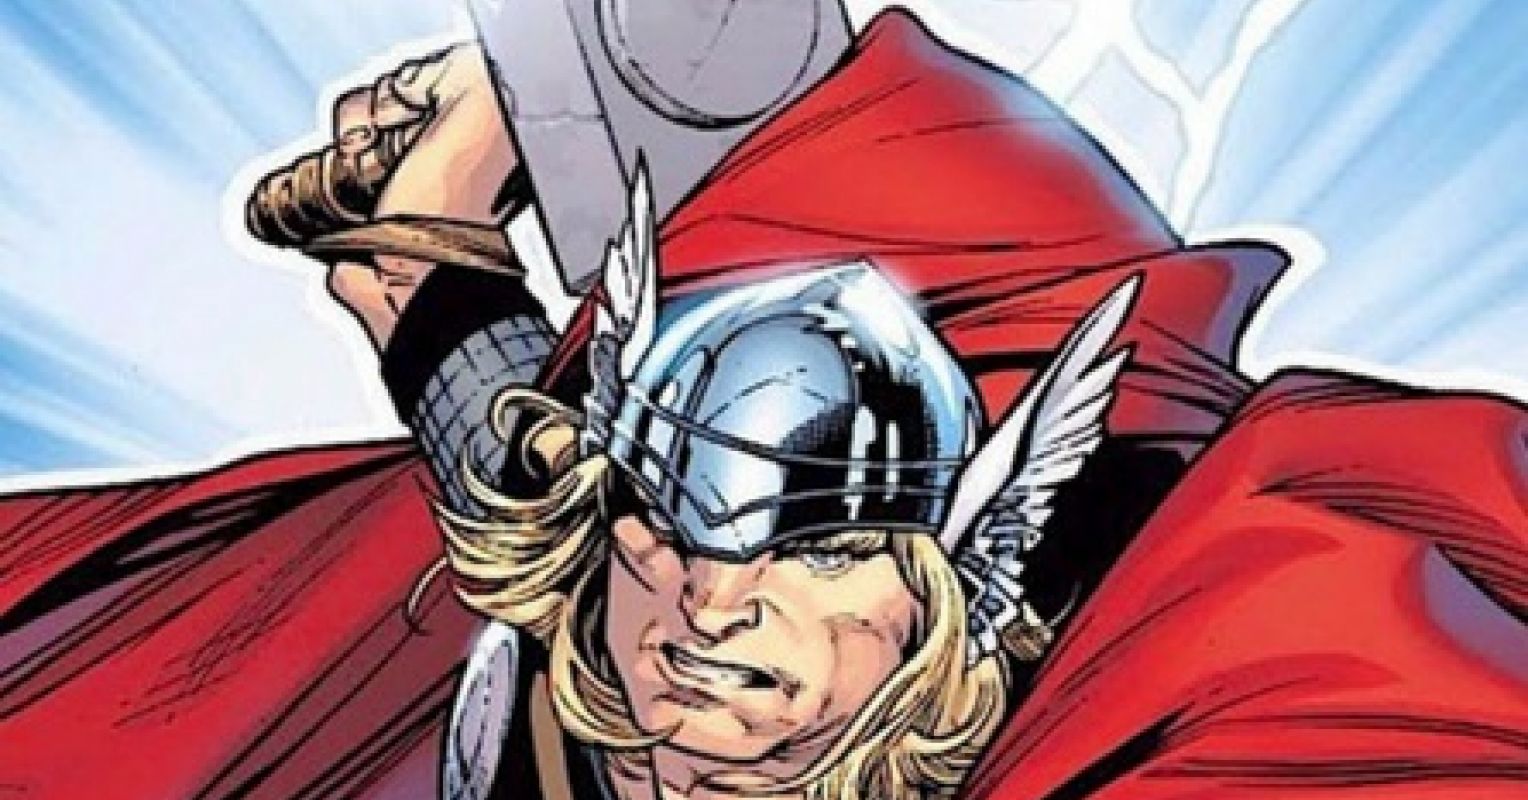 What Makes Thor Worthy?